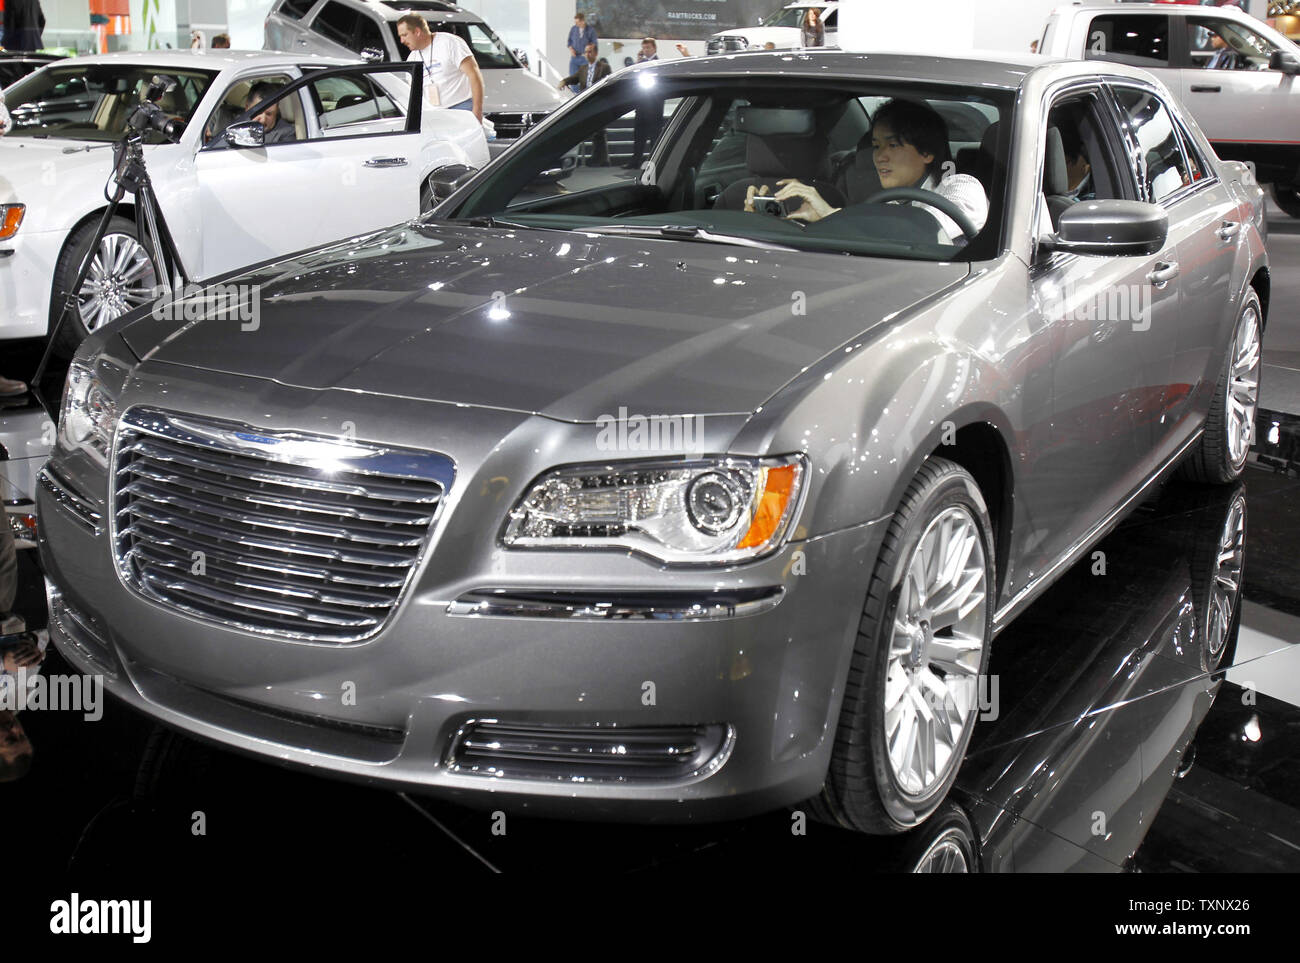 An attendee photographs the interior of the redesigned Chrysler 300 at the 2011 North American International Auto Show at the Cobo Center in Detroit, January 11, 2011. UPI/Mark Cowan Stock Photo